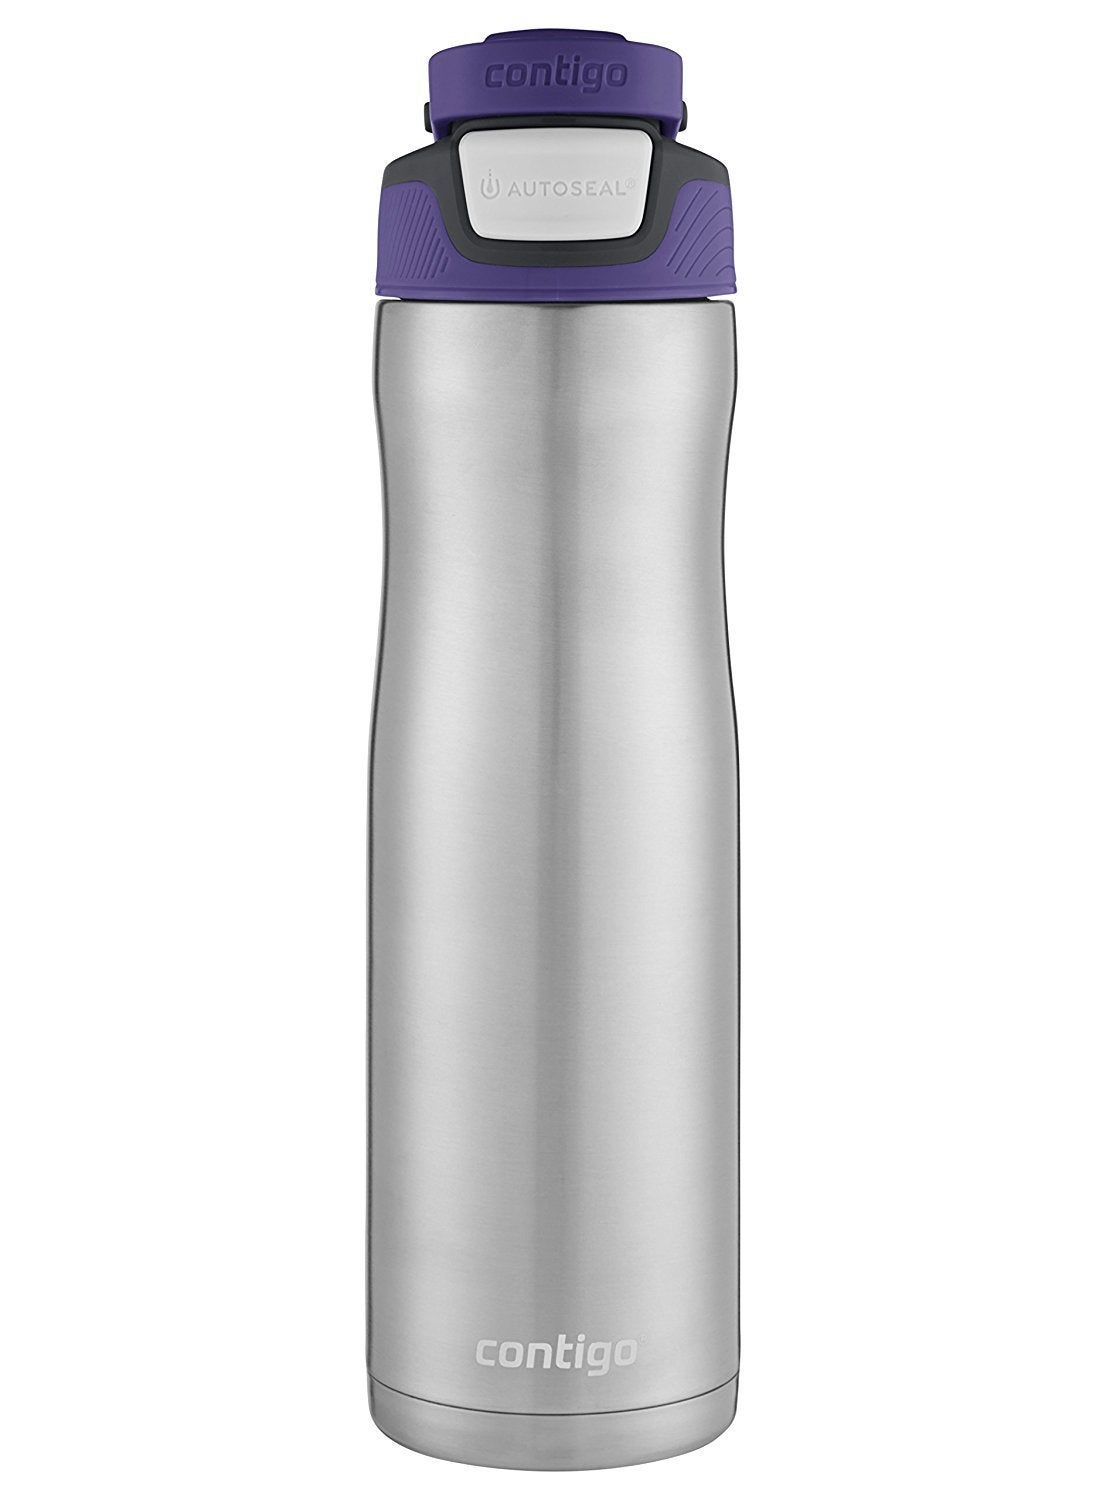 Contigo AUTOSEAL Chill Insulated Water Bottle 24oz SS Grapevine Purple Stainless 